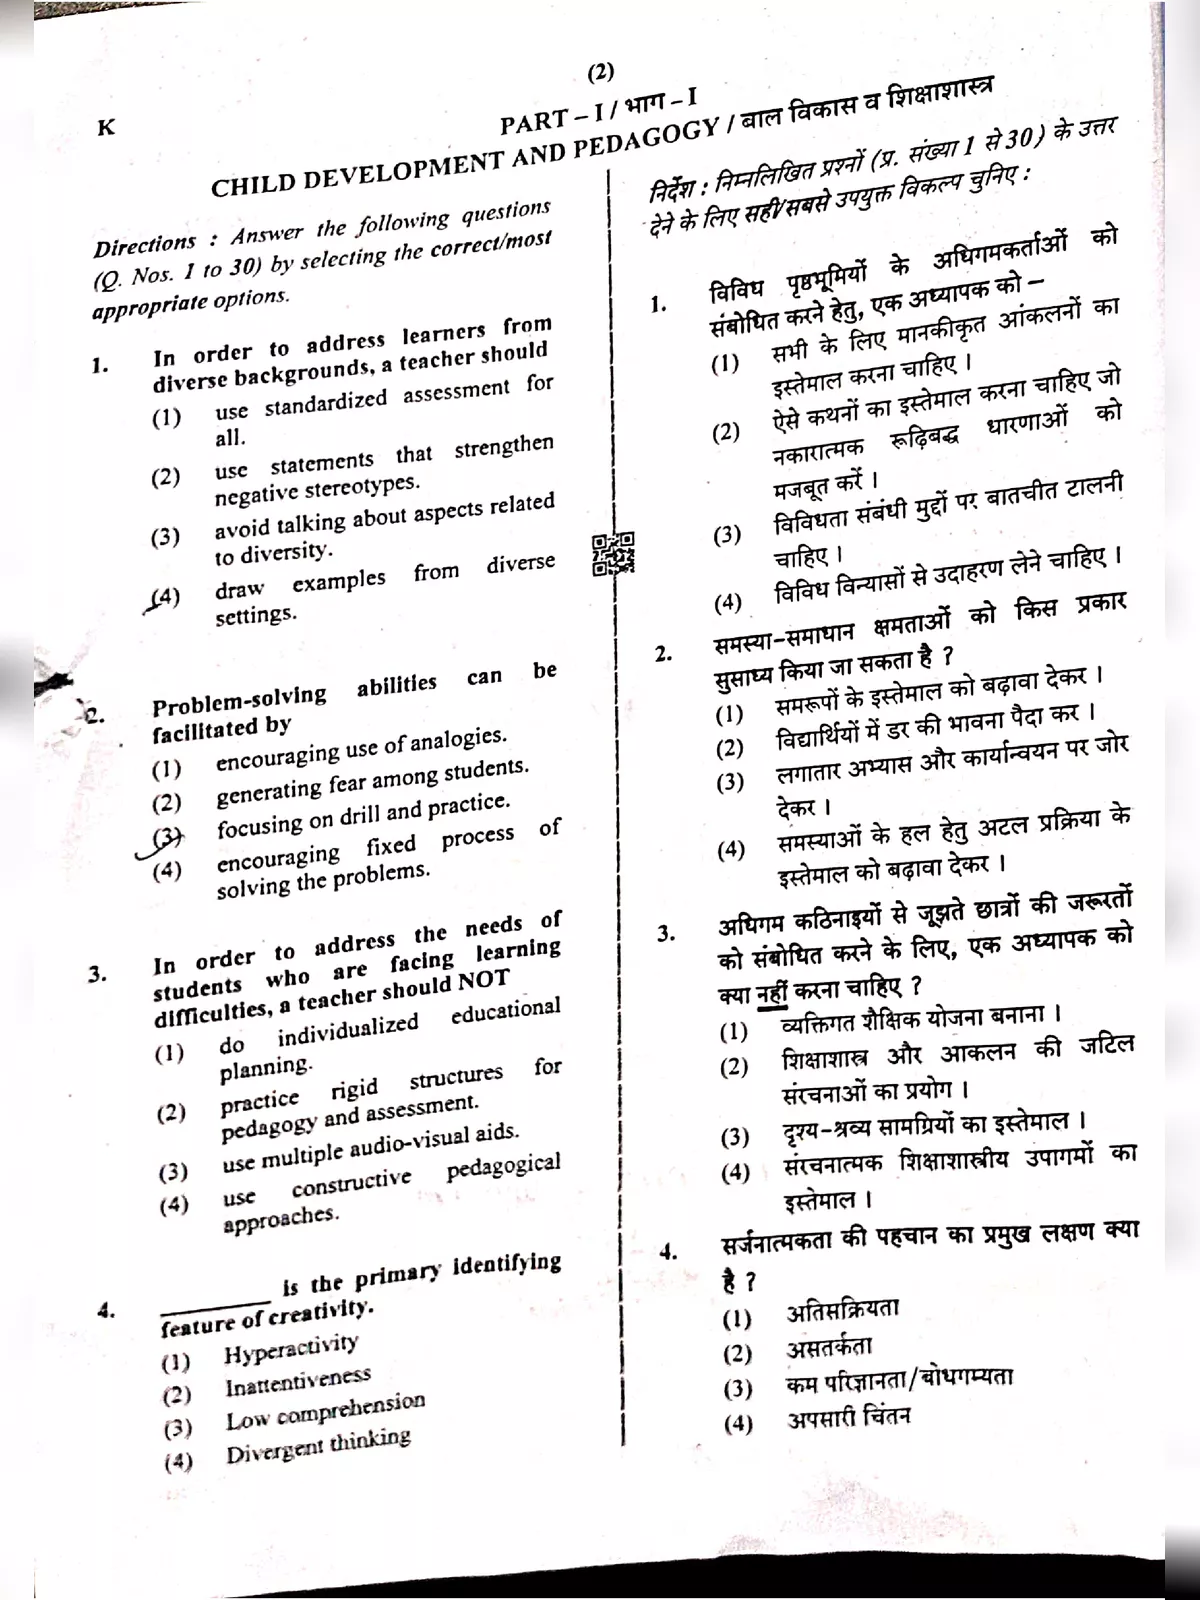 CTET Question Paper with Answer Key 2021